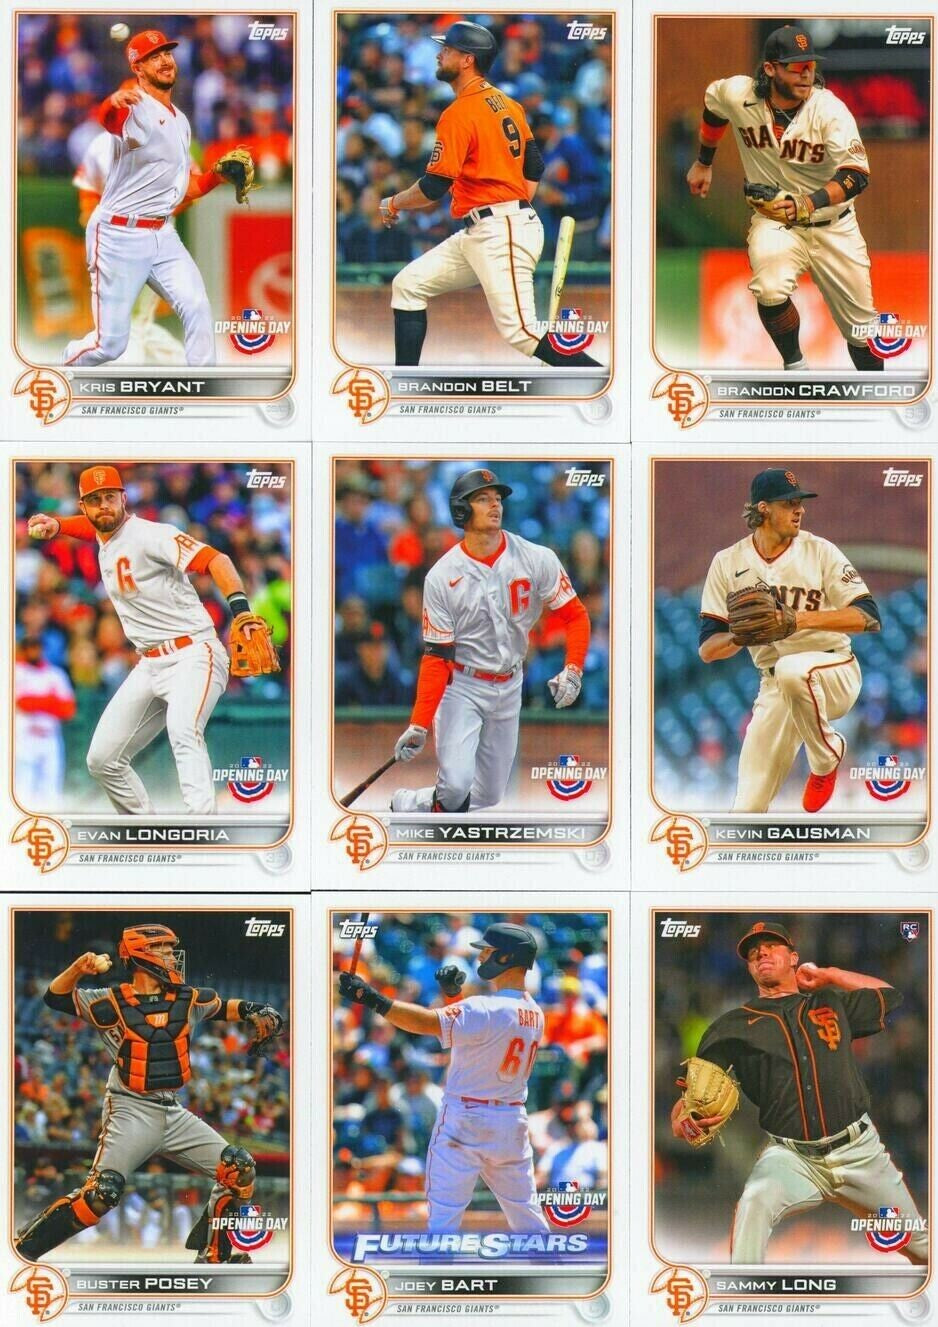 San Francisco Giants 2022 Topps Opening Day 9 Card Team Set with Buster Posey Plus